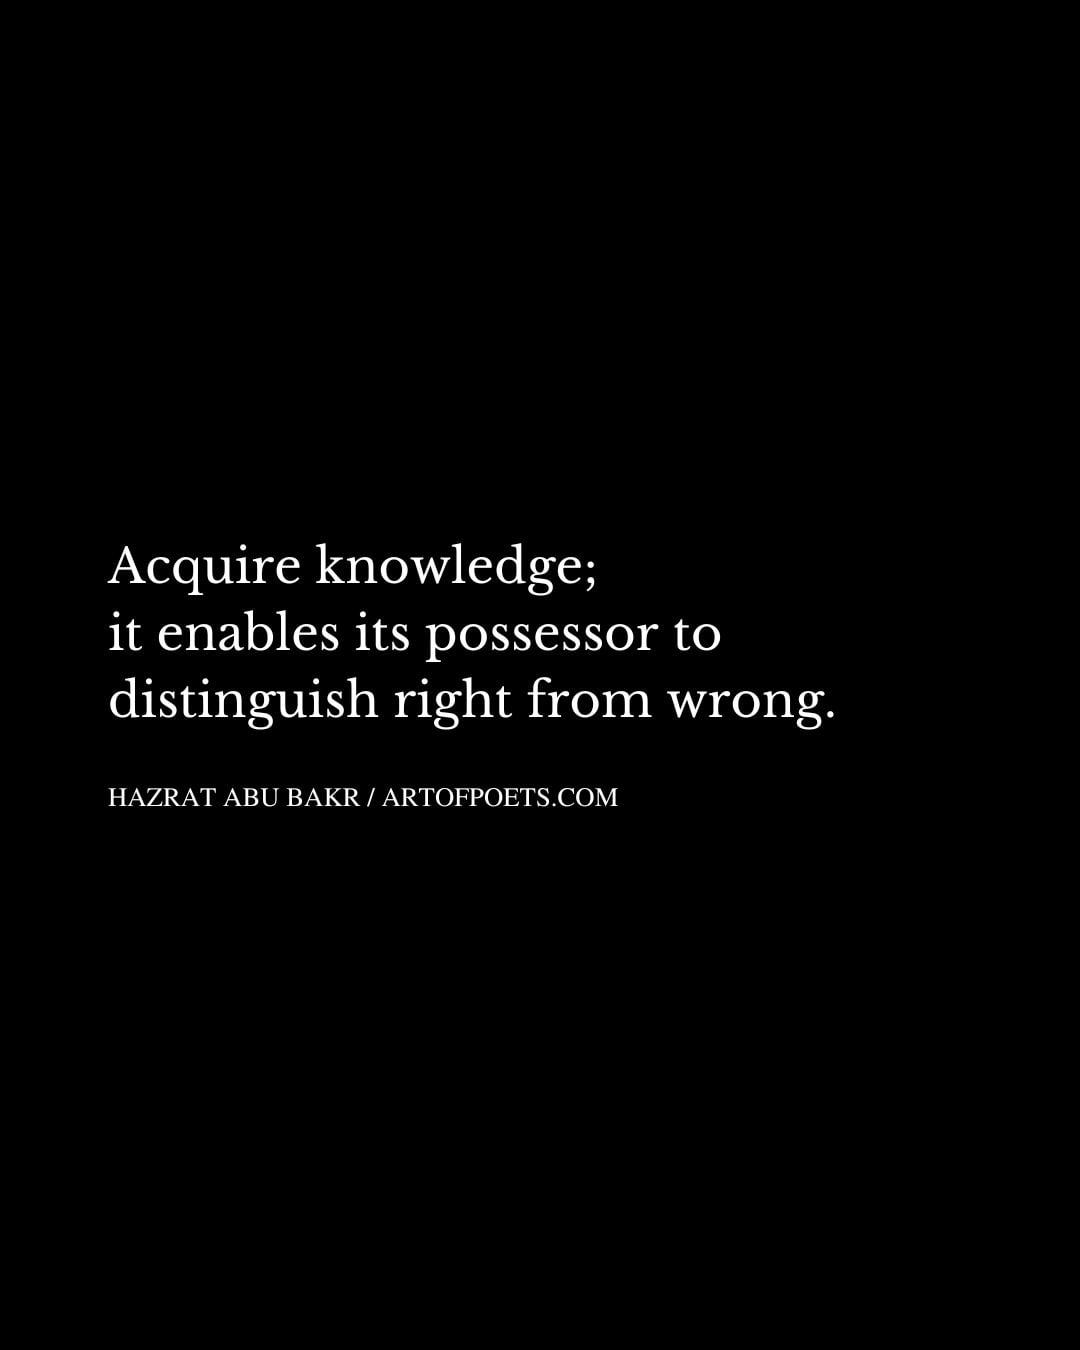 Acquire knowledge it enables its possessor to distinguish right from wrong